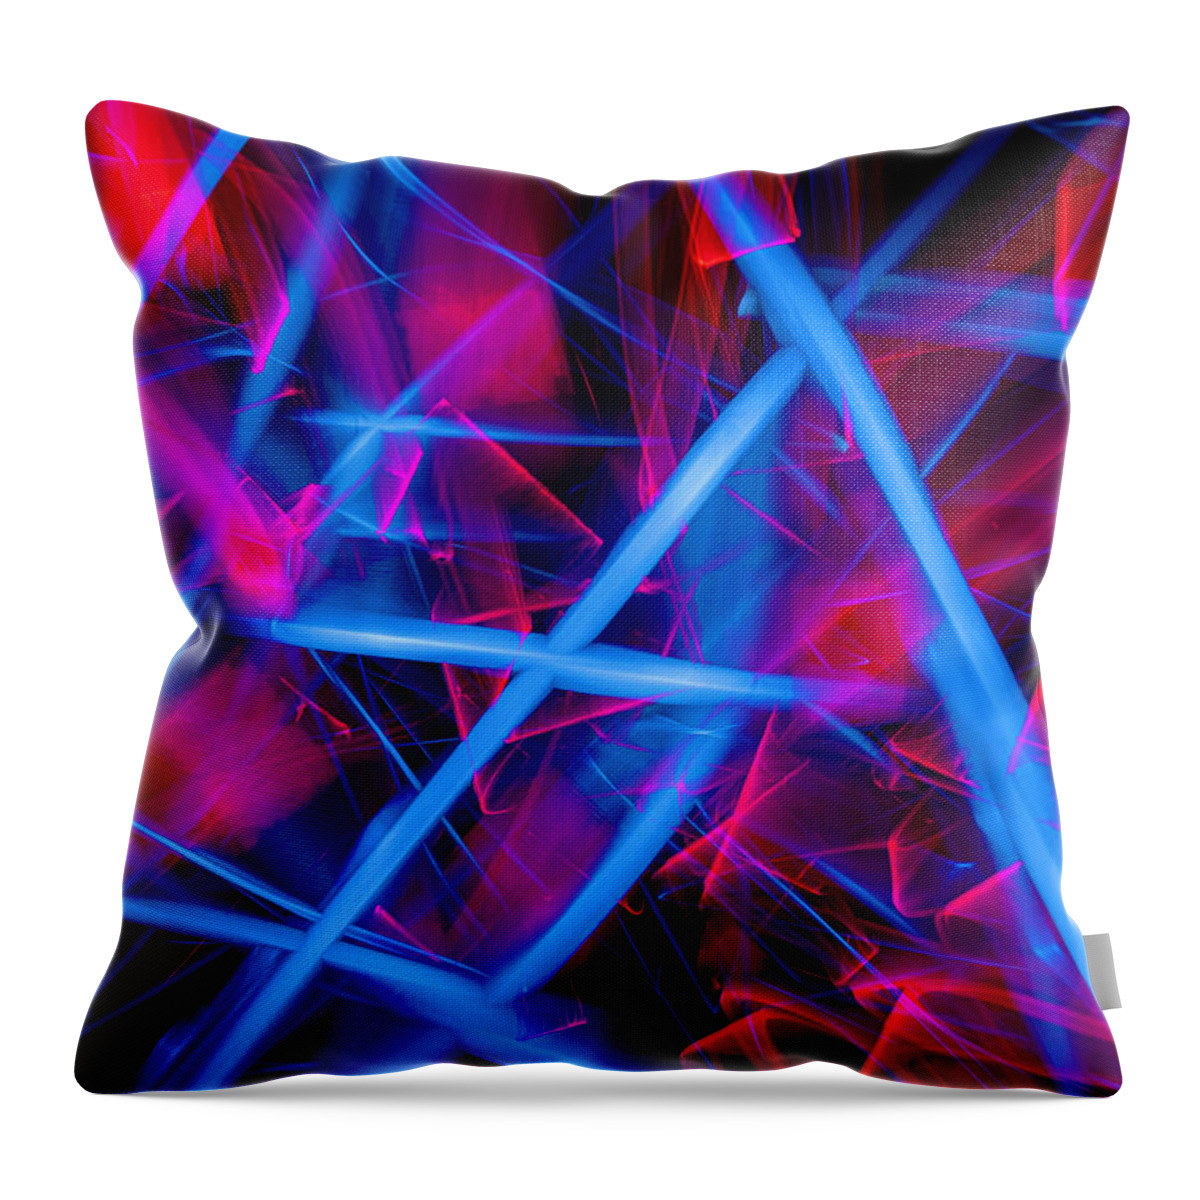  Throw Pillow featuring the photograph Lp 03 by Fred LeBlanc